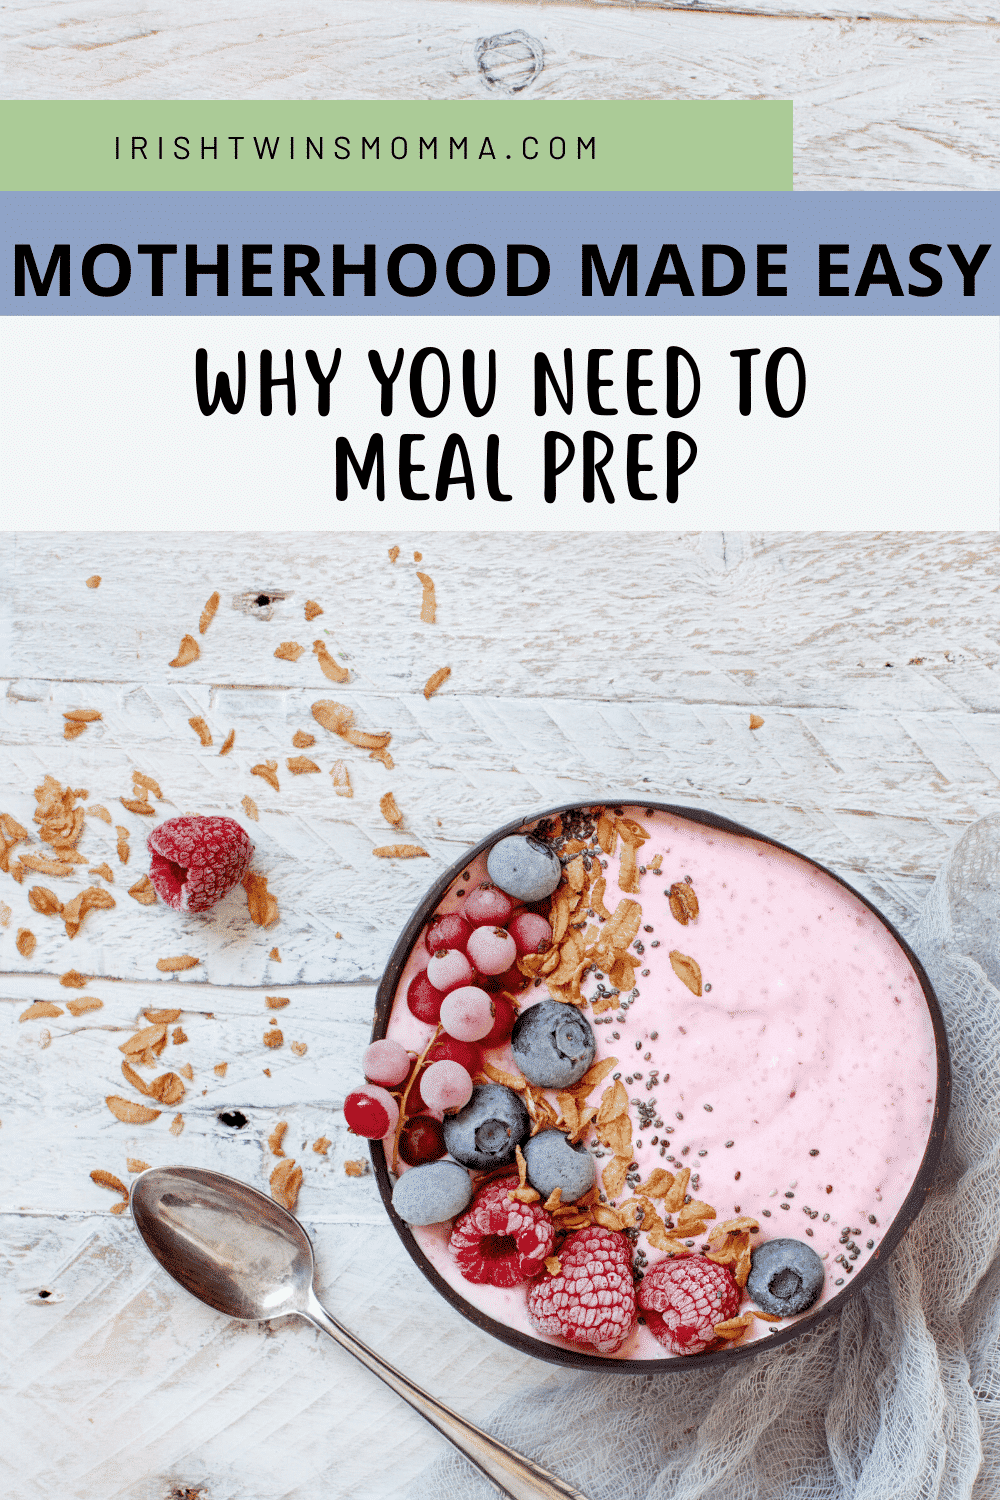 One of the best organization hacks I’ve discovered is the art of meal prepping! Read on to find out more! via @irishtwinsmom11